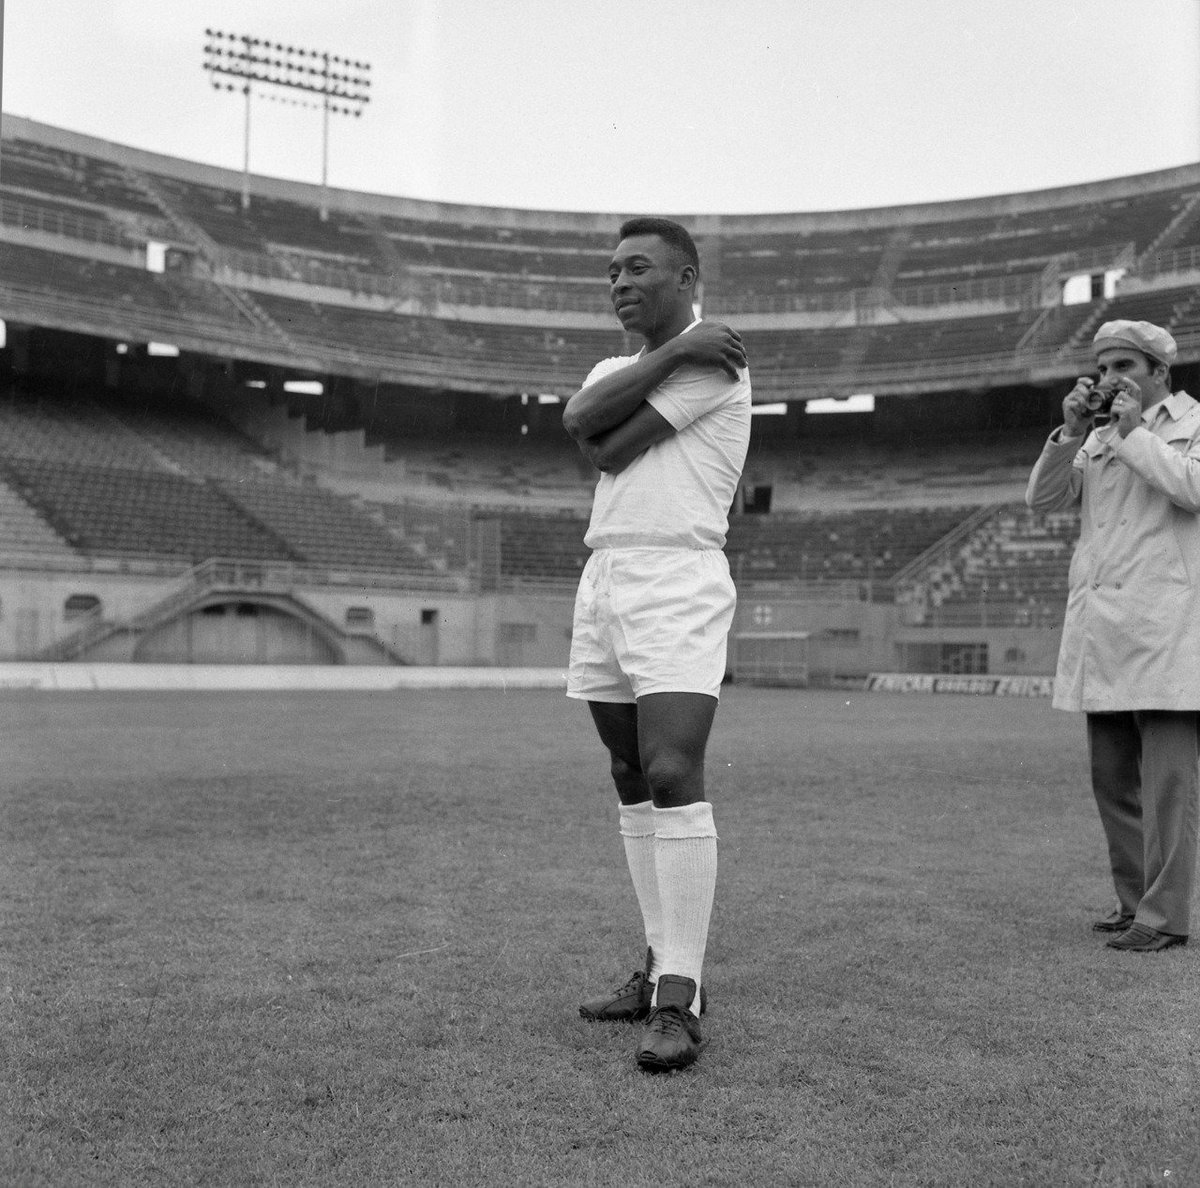 O Rei #Pelé on the pitch of the old #StadioGiuseppeMeazza well known as #SanSiro 1963 @Pele